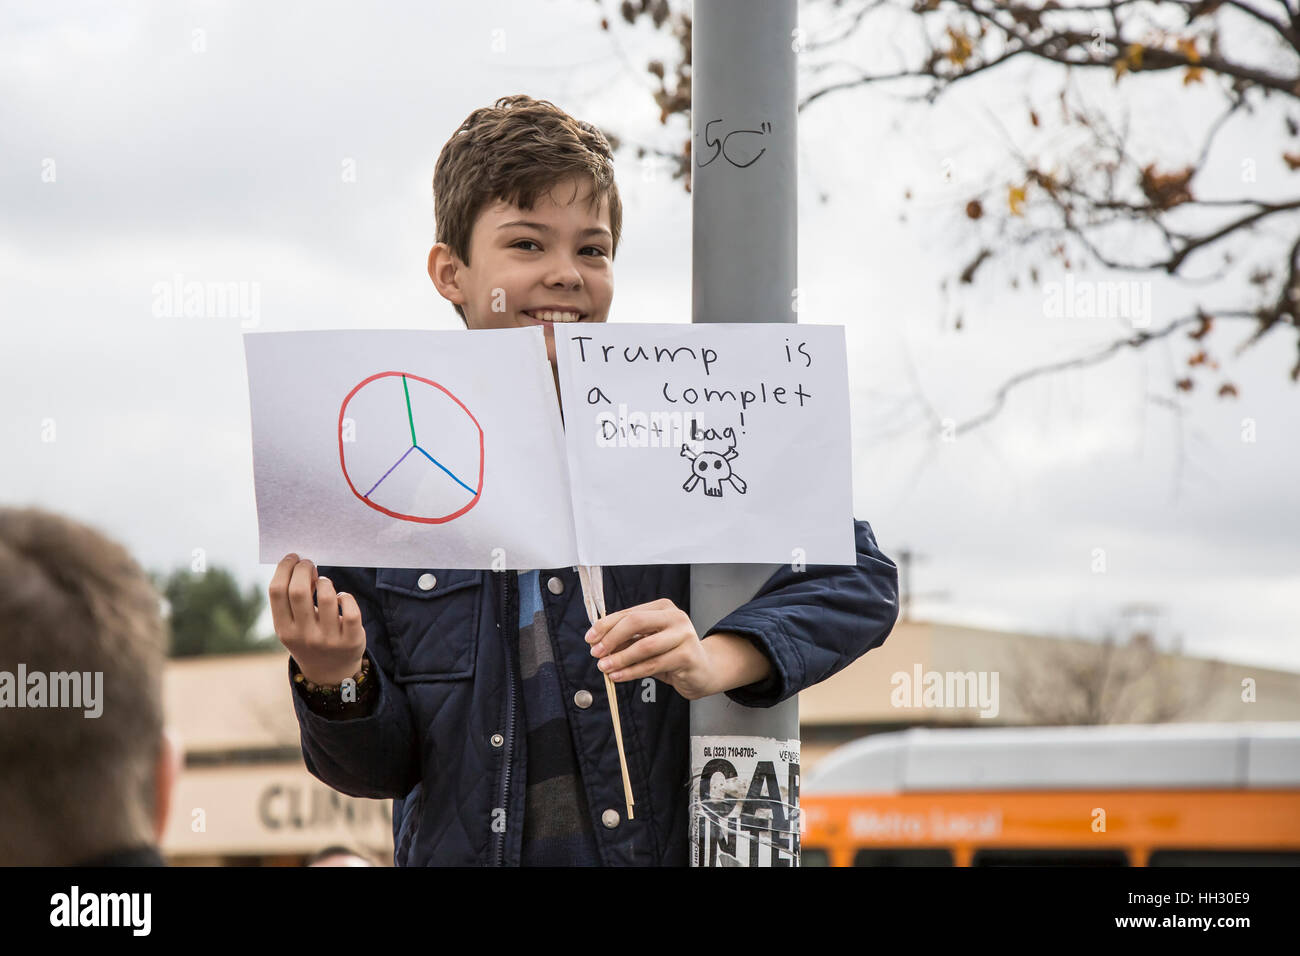 Los Angeles, USA. 15th Jan, 2017. A young boy holds his homemade signs – one for peace and one stating 'Trump is a complet (sic) Dirt-bag!' – at the Los Angeles rally to save the Affordable Care Act at LAC/USC Medical Center. Credit: Andie Mills/Alamy Live News. Stock Photo